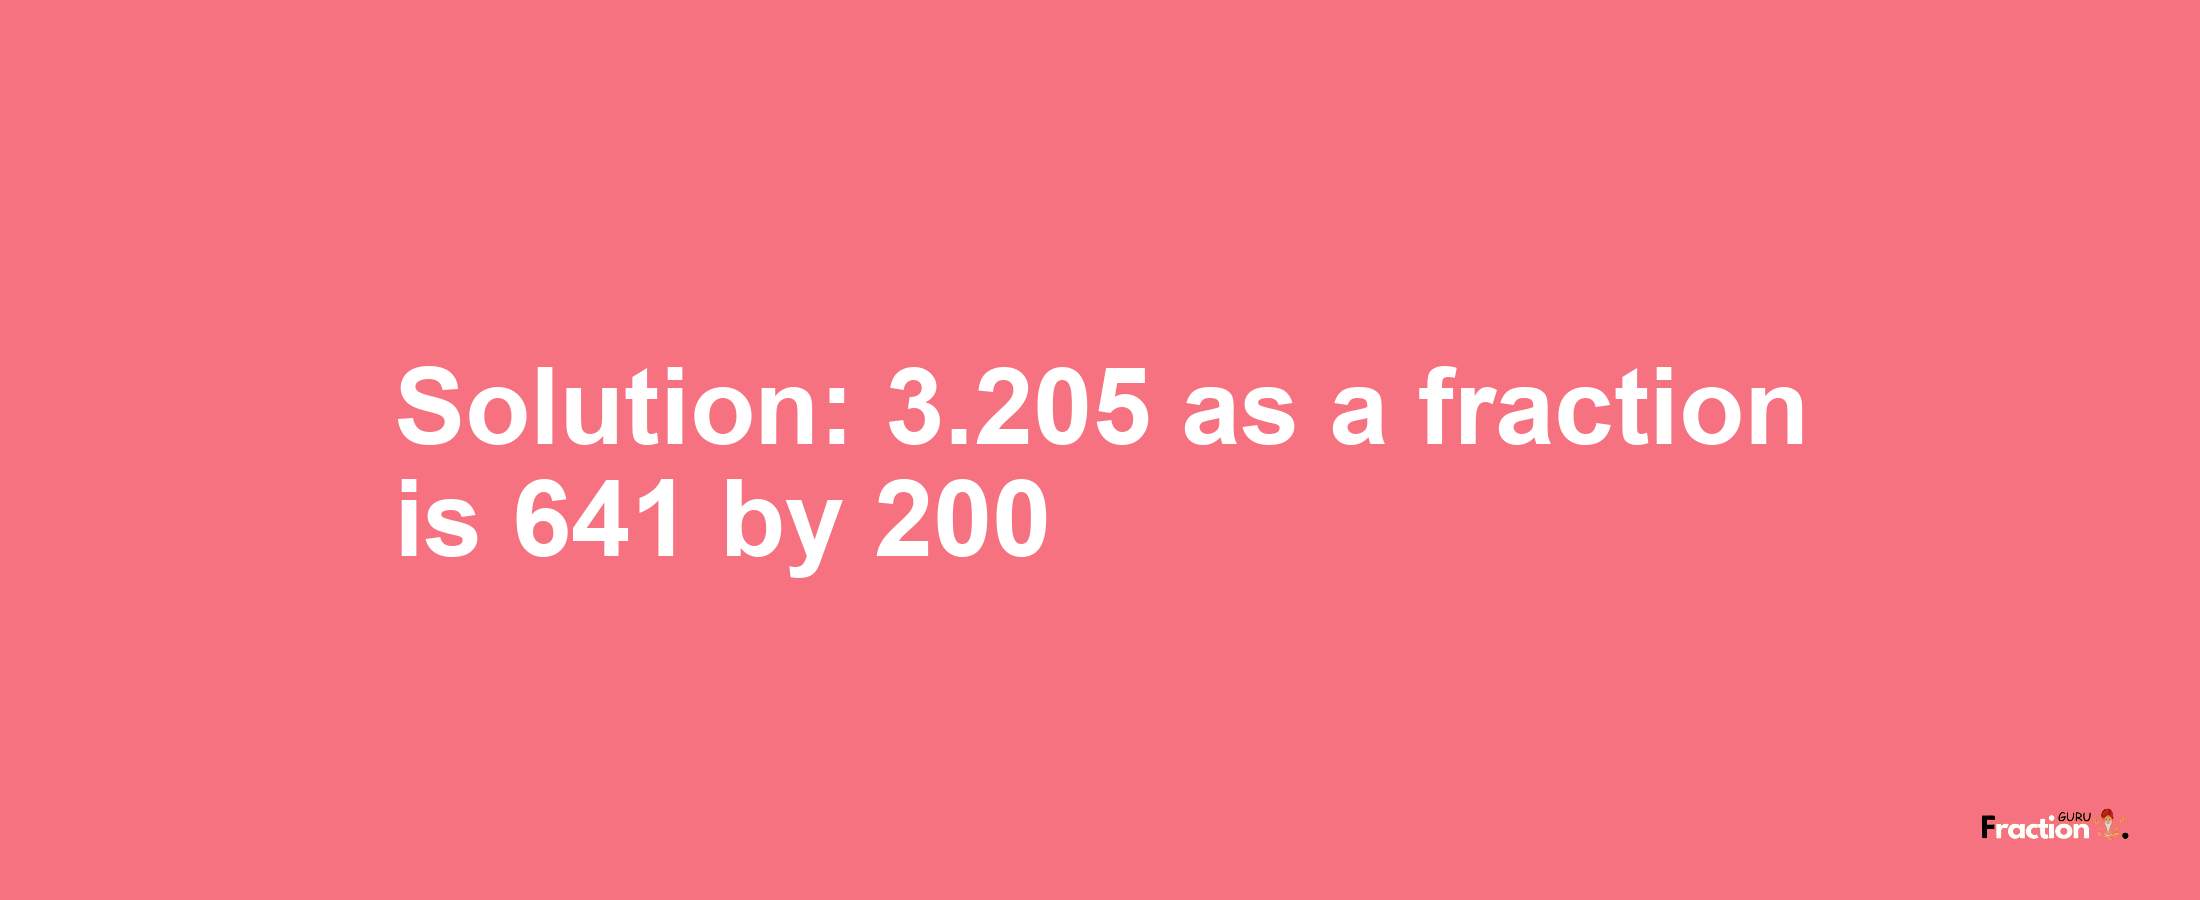 Solution:3.205 as a fraction is 641/200